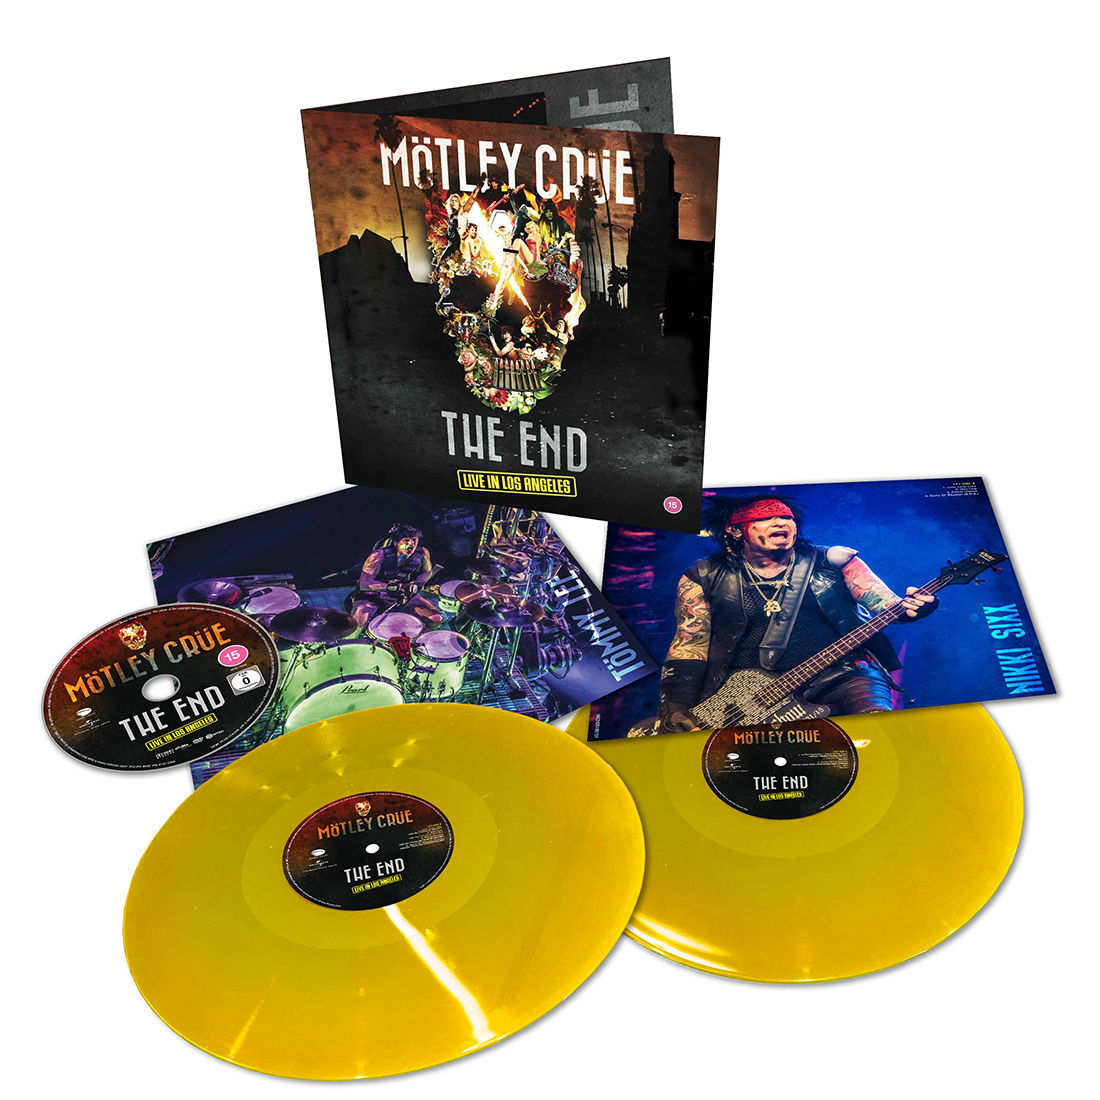 Motley Crue - The End Live In Los Angeles: Limited Edition Yellow Gatefold Vinyl 2LP